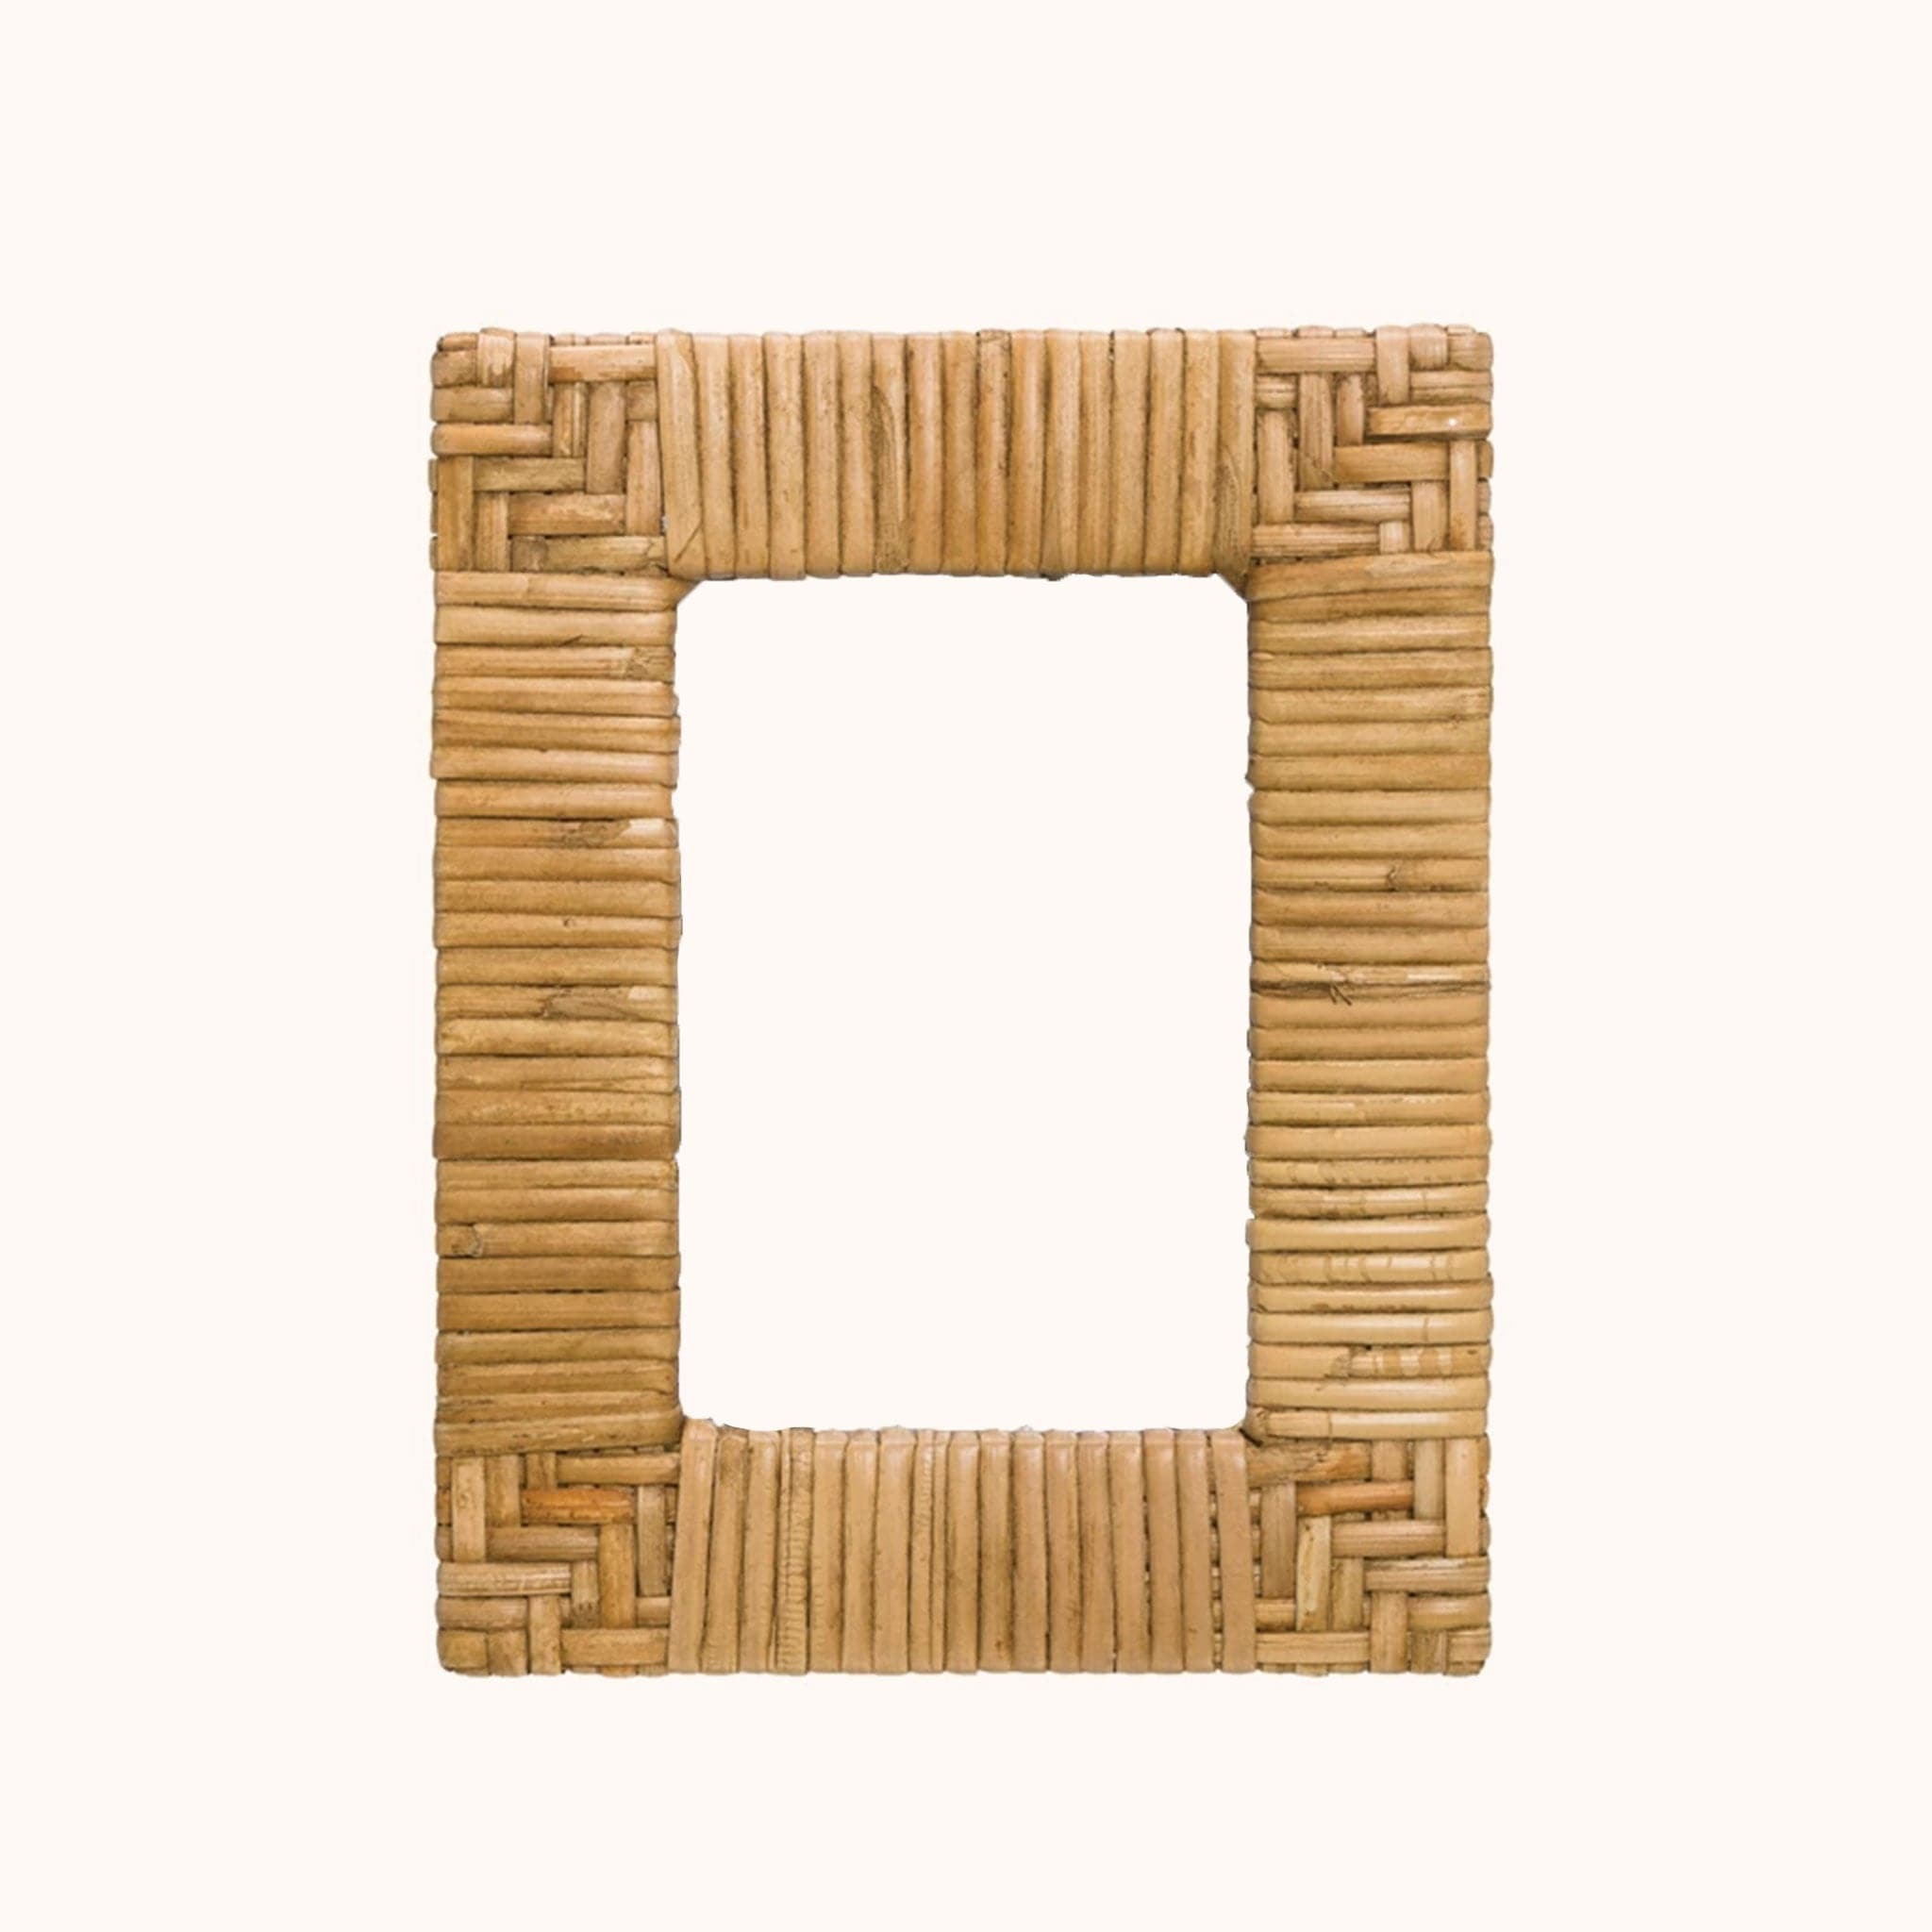 In front of a white background is a rattan picture frame. The corners of the picture frame are a chevron design and the sides are stripes. 